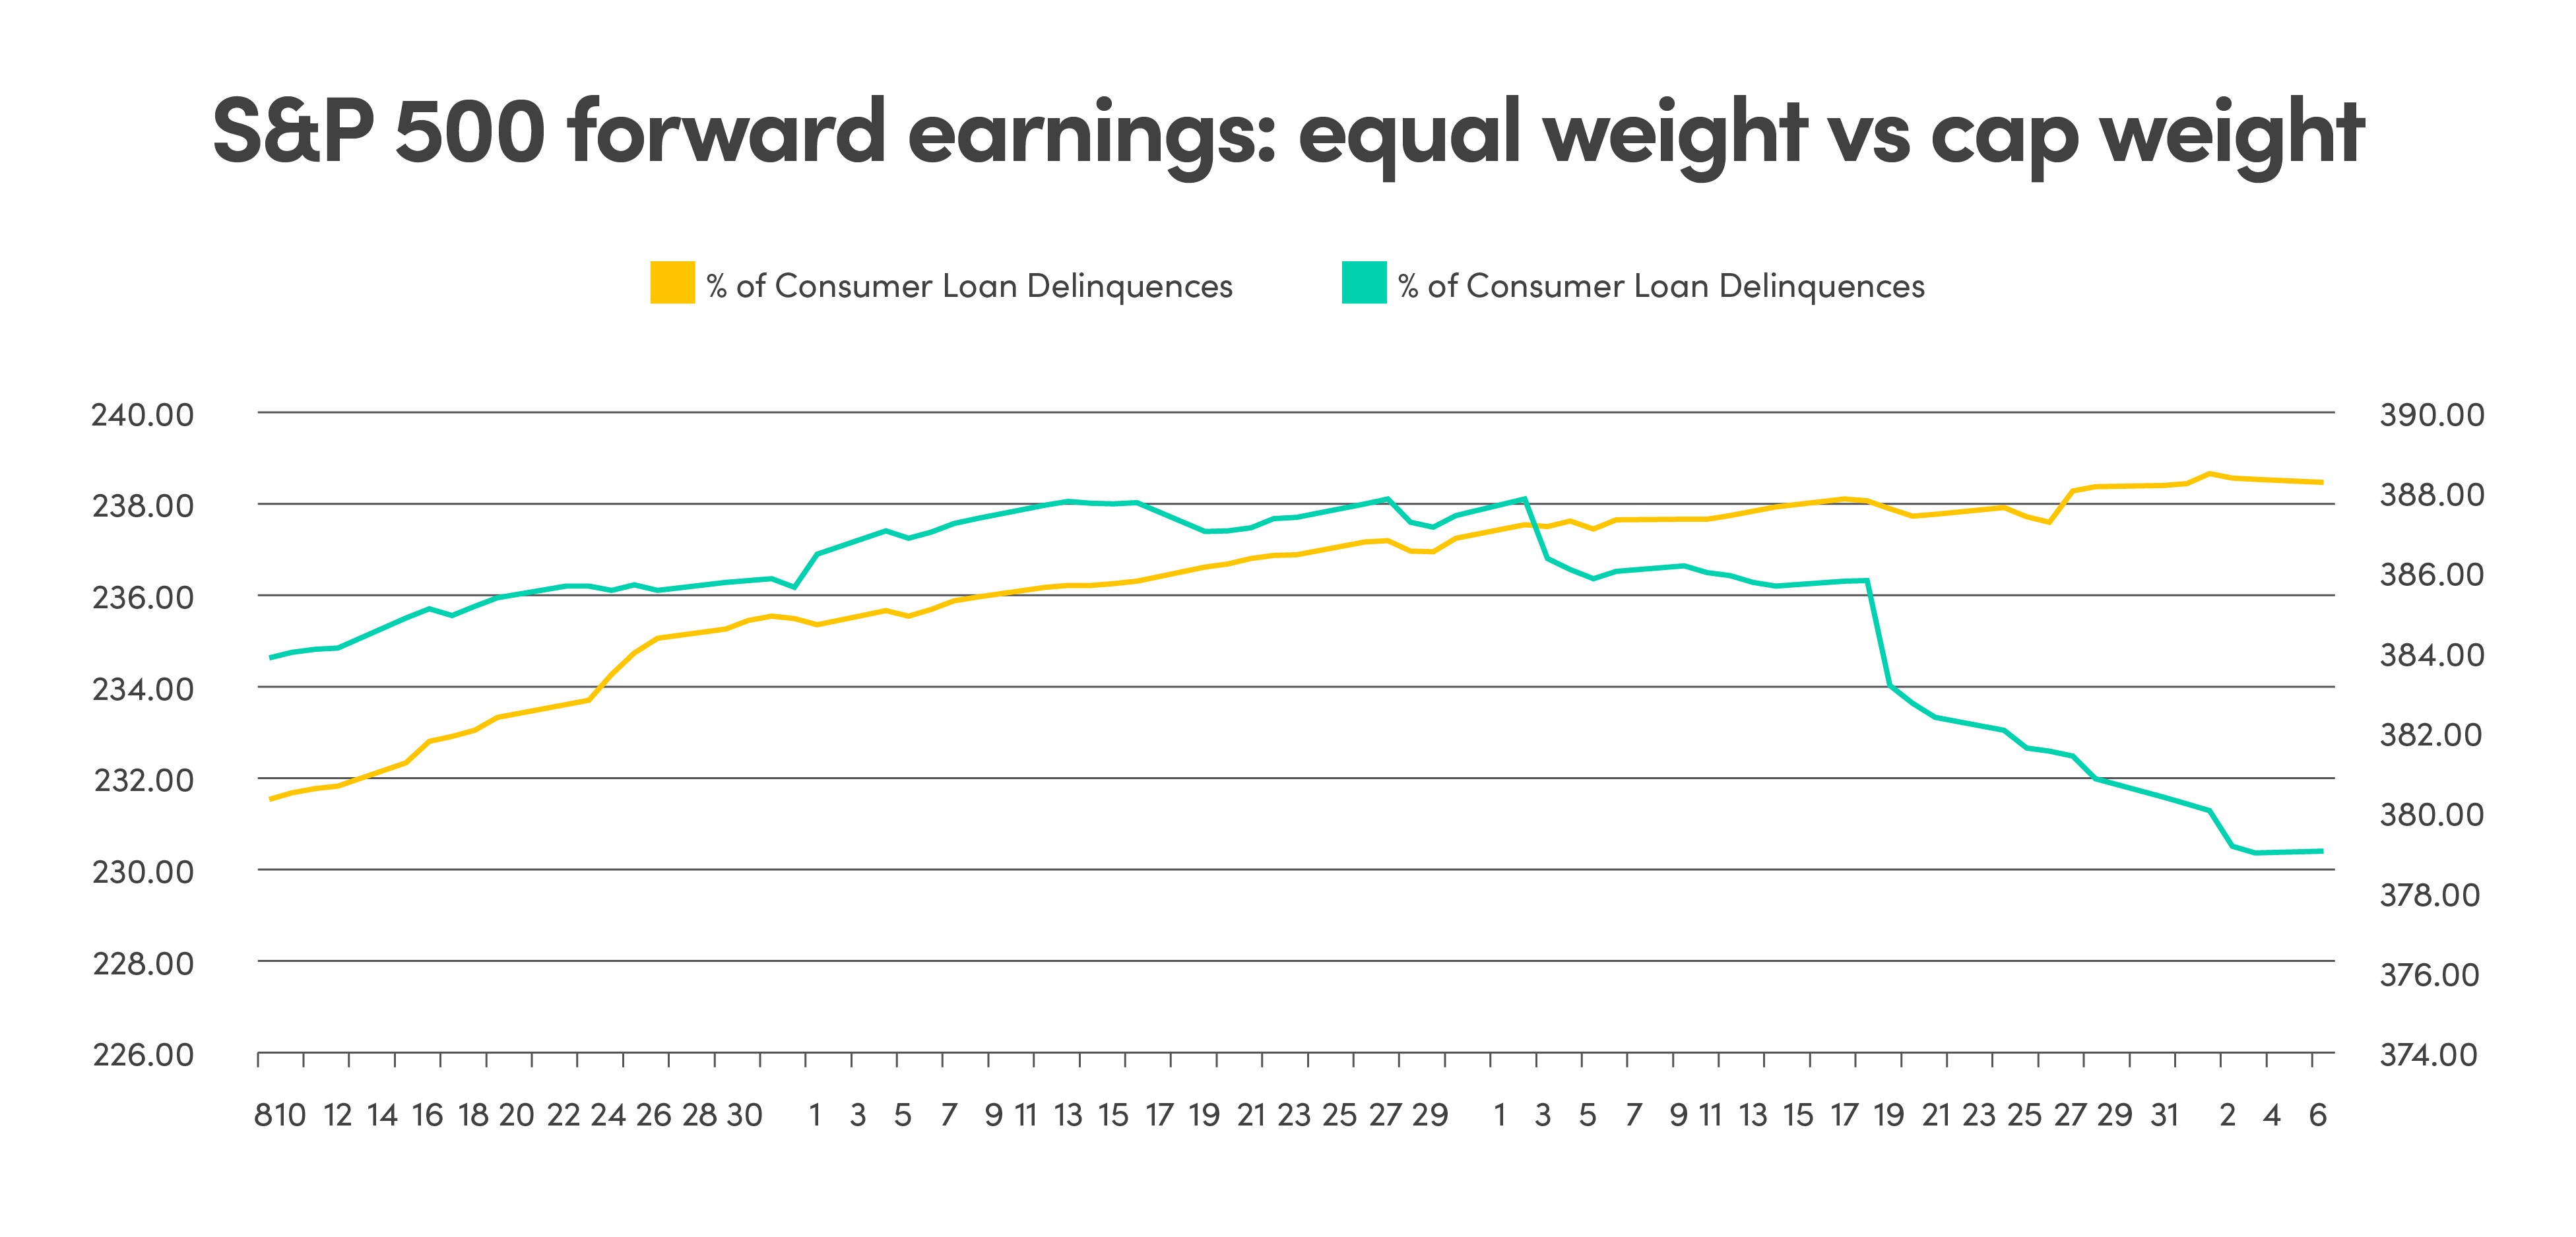 Line graph comparing equal weight vs cap weight of S&P 500 forward earnings. The graph indicates growth in earnings estimates over the next 12 months while also showing an expected decline in earnings.